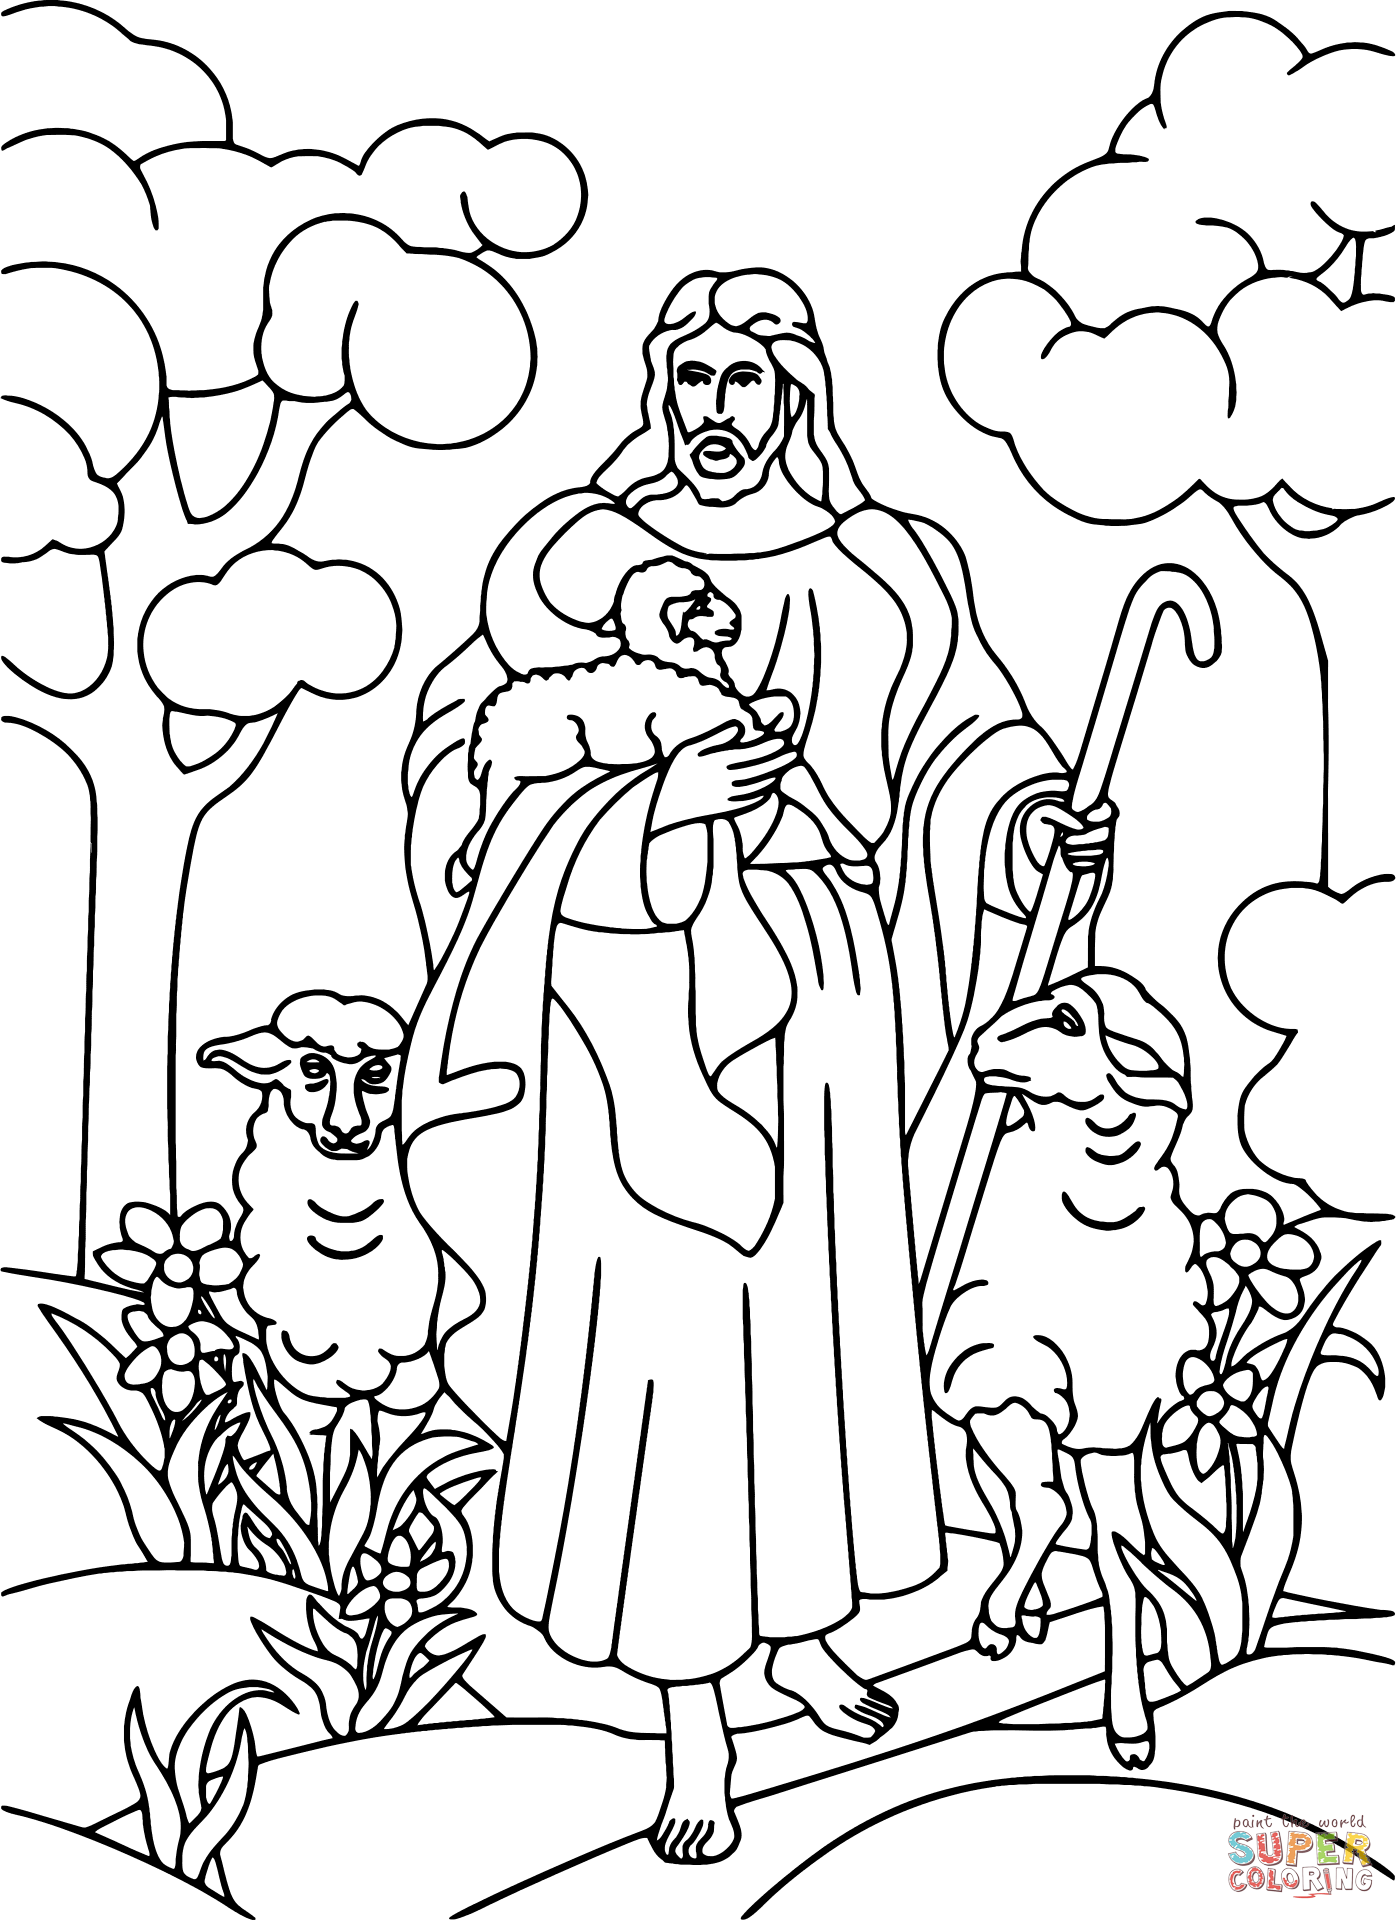 Jesus Holding Lamb coloring page | Free Printable Coloring Pages